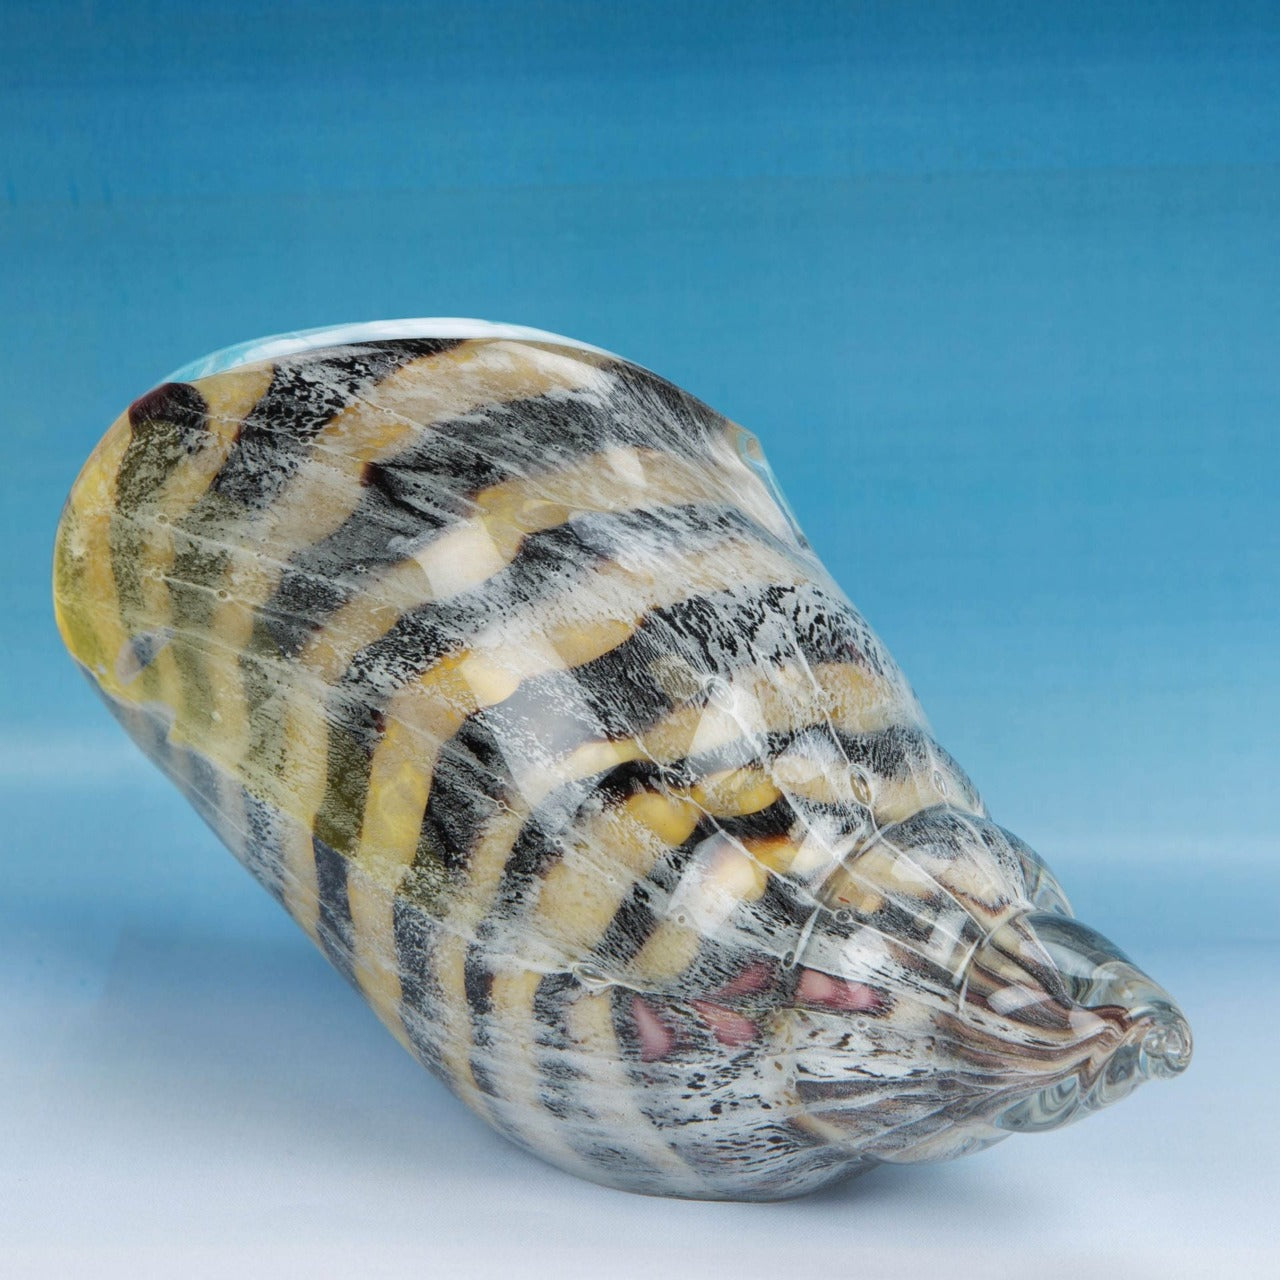 Objets Dart Glass Figurine - Shell  A beautiful, large handmade glass conch shell ornament. From Objets d'Art - hand blown and one hundred percent unique.